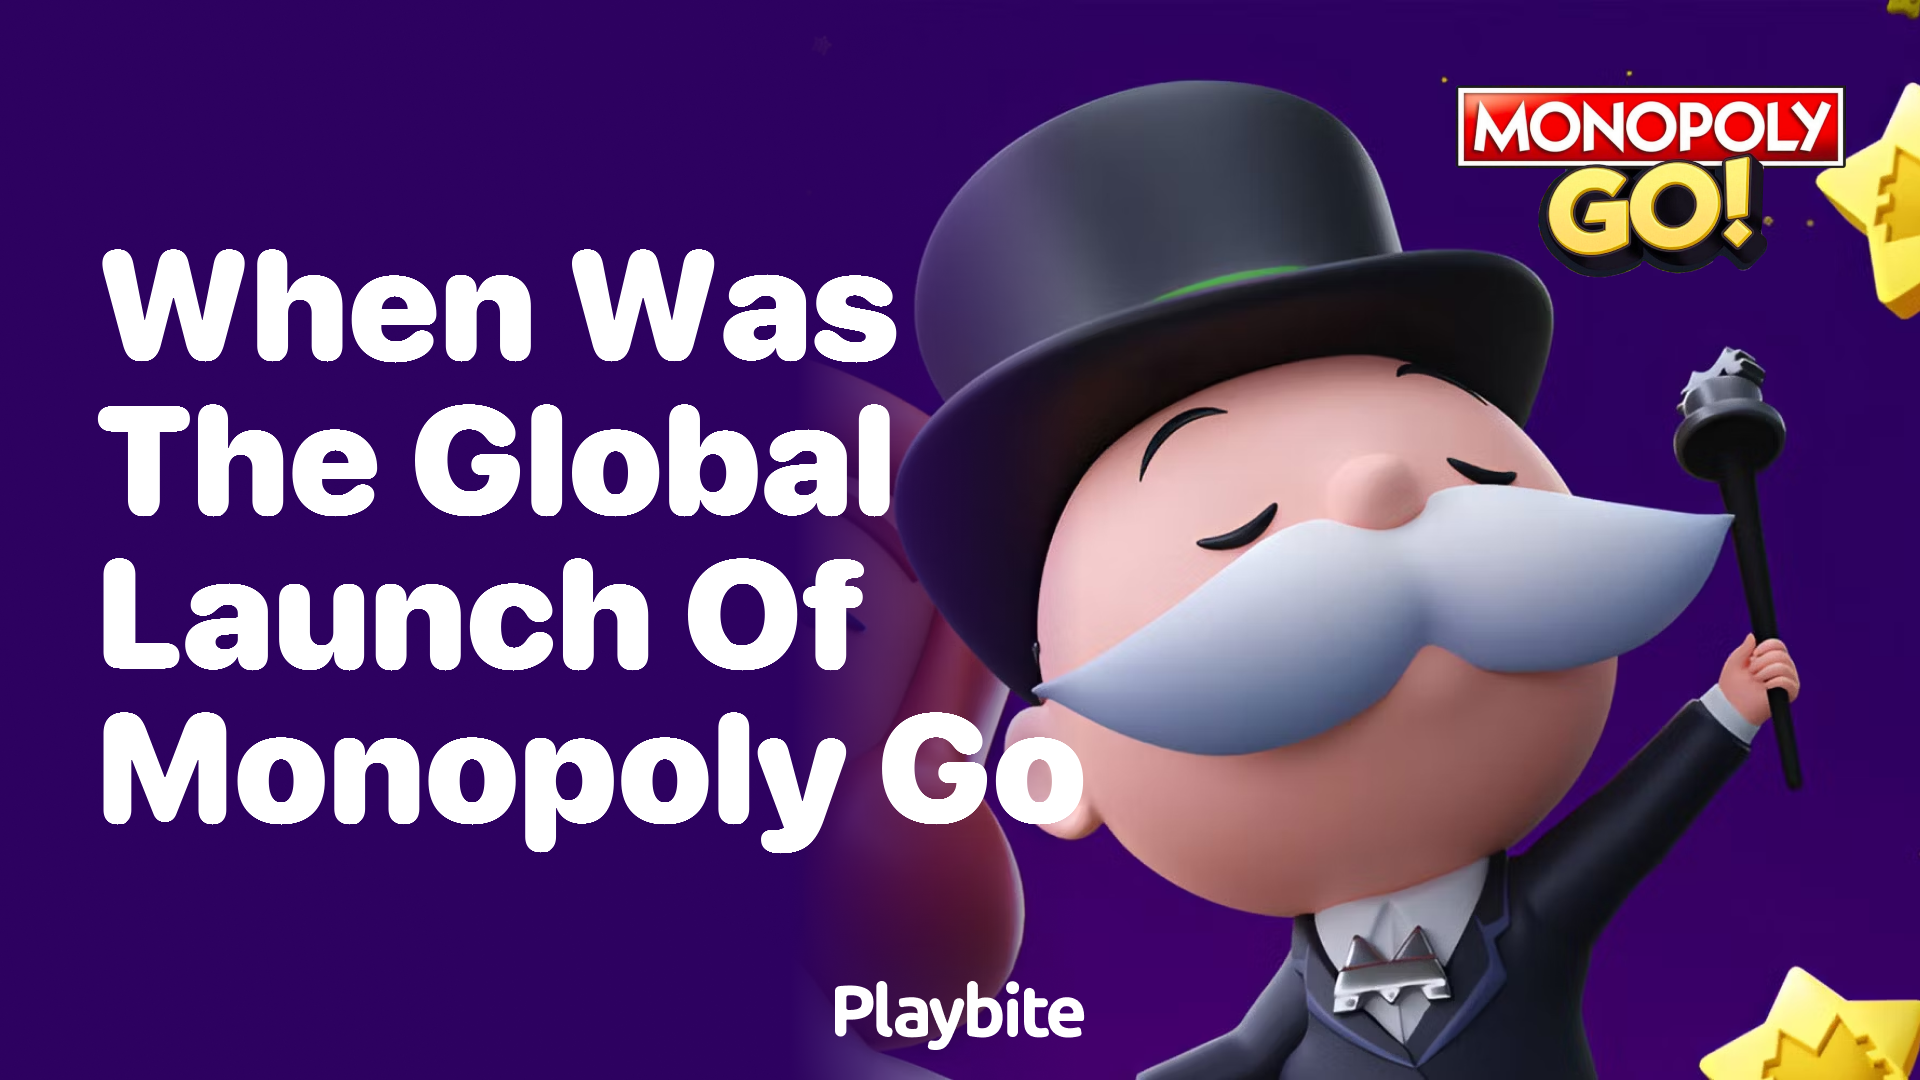 When Was the Global Launch of Monopoly Go?